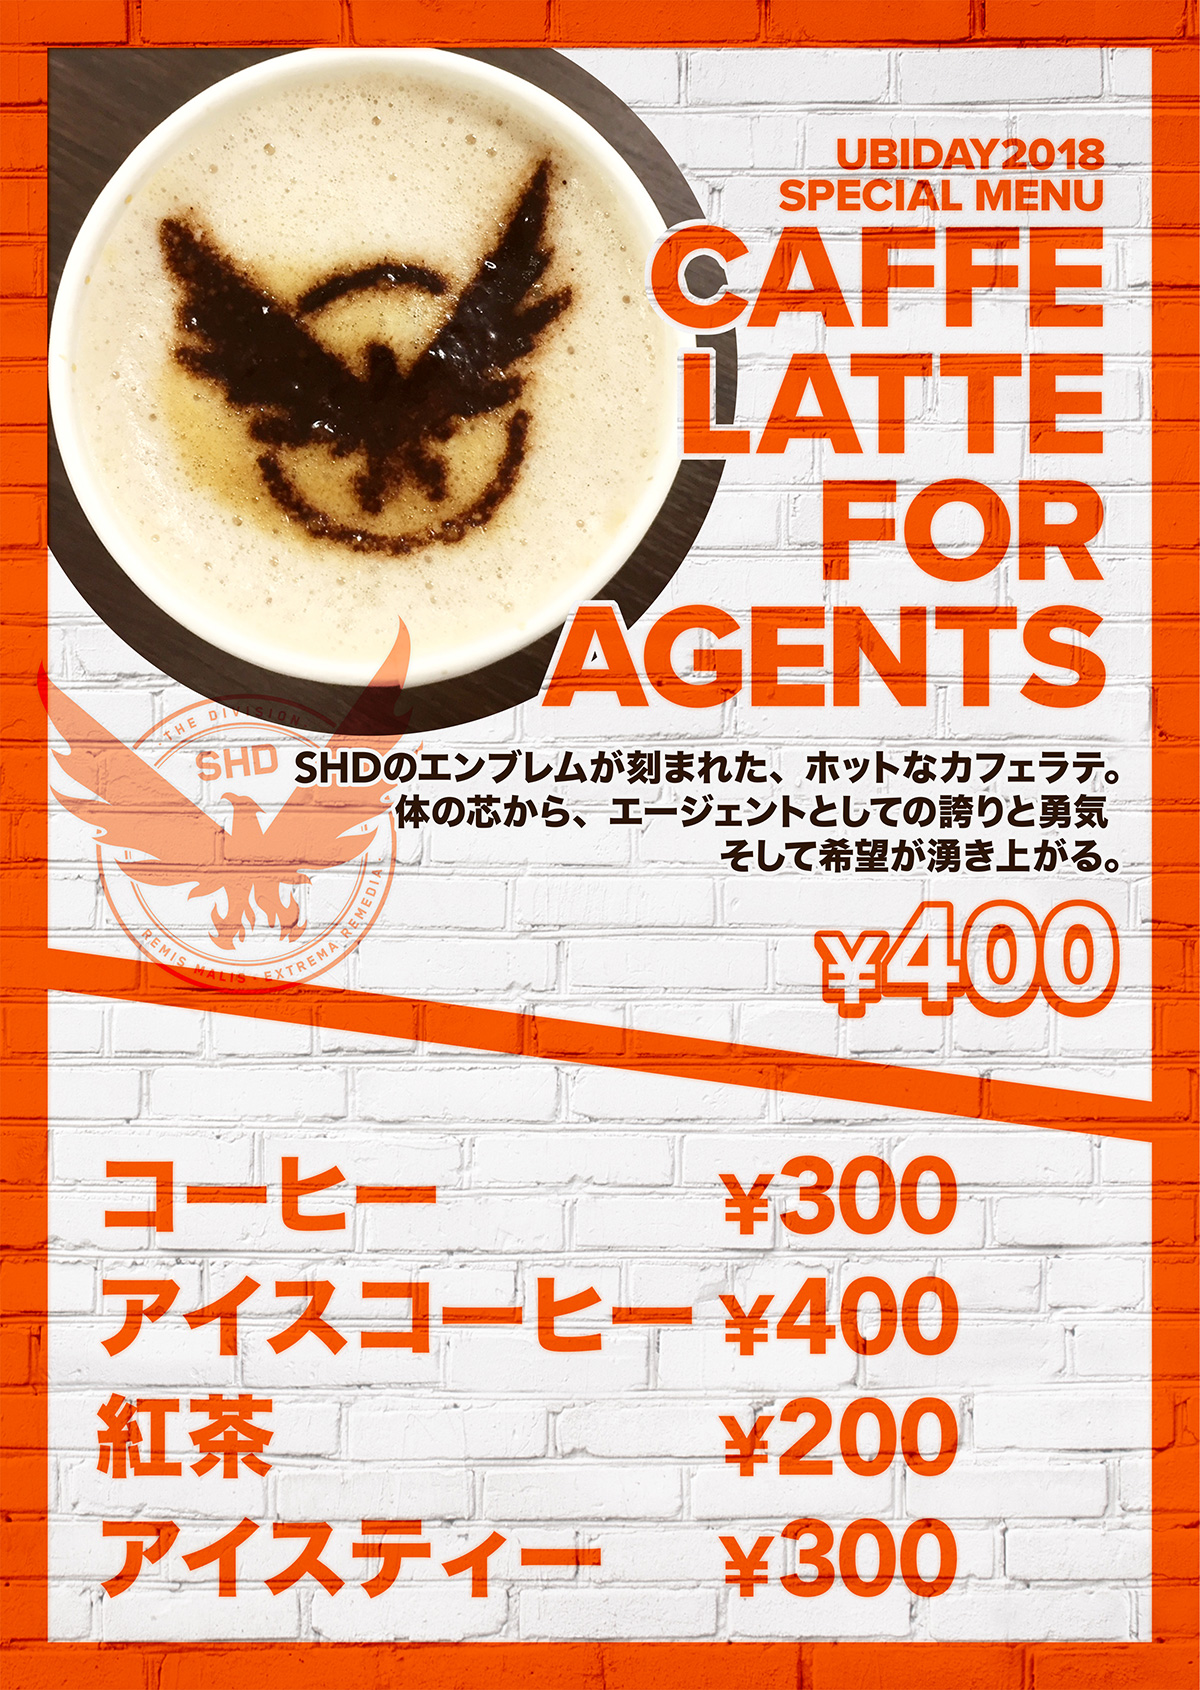 CAFFE LATTE FOR AGENTS